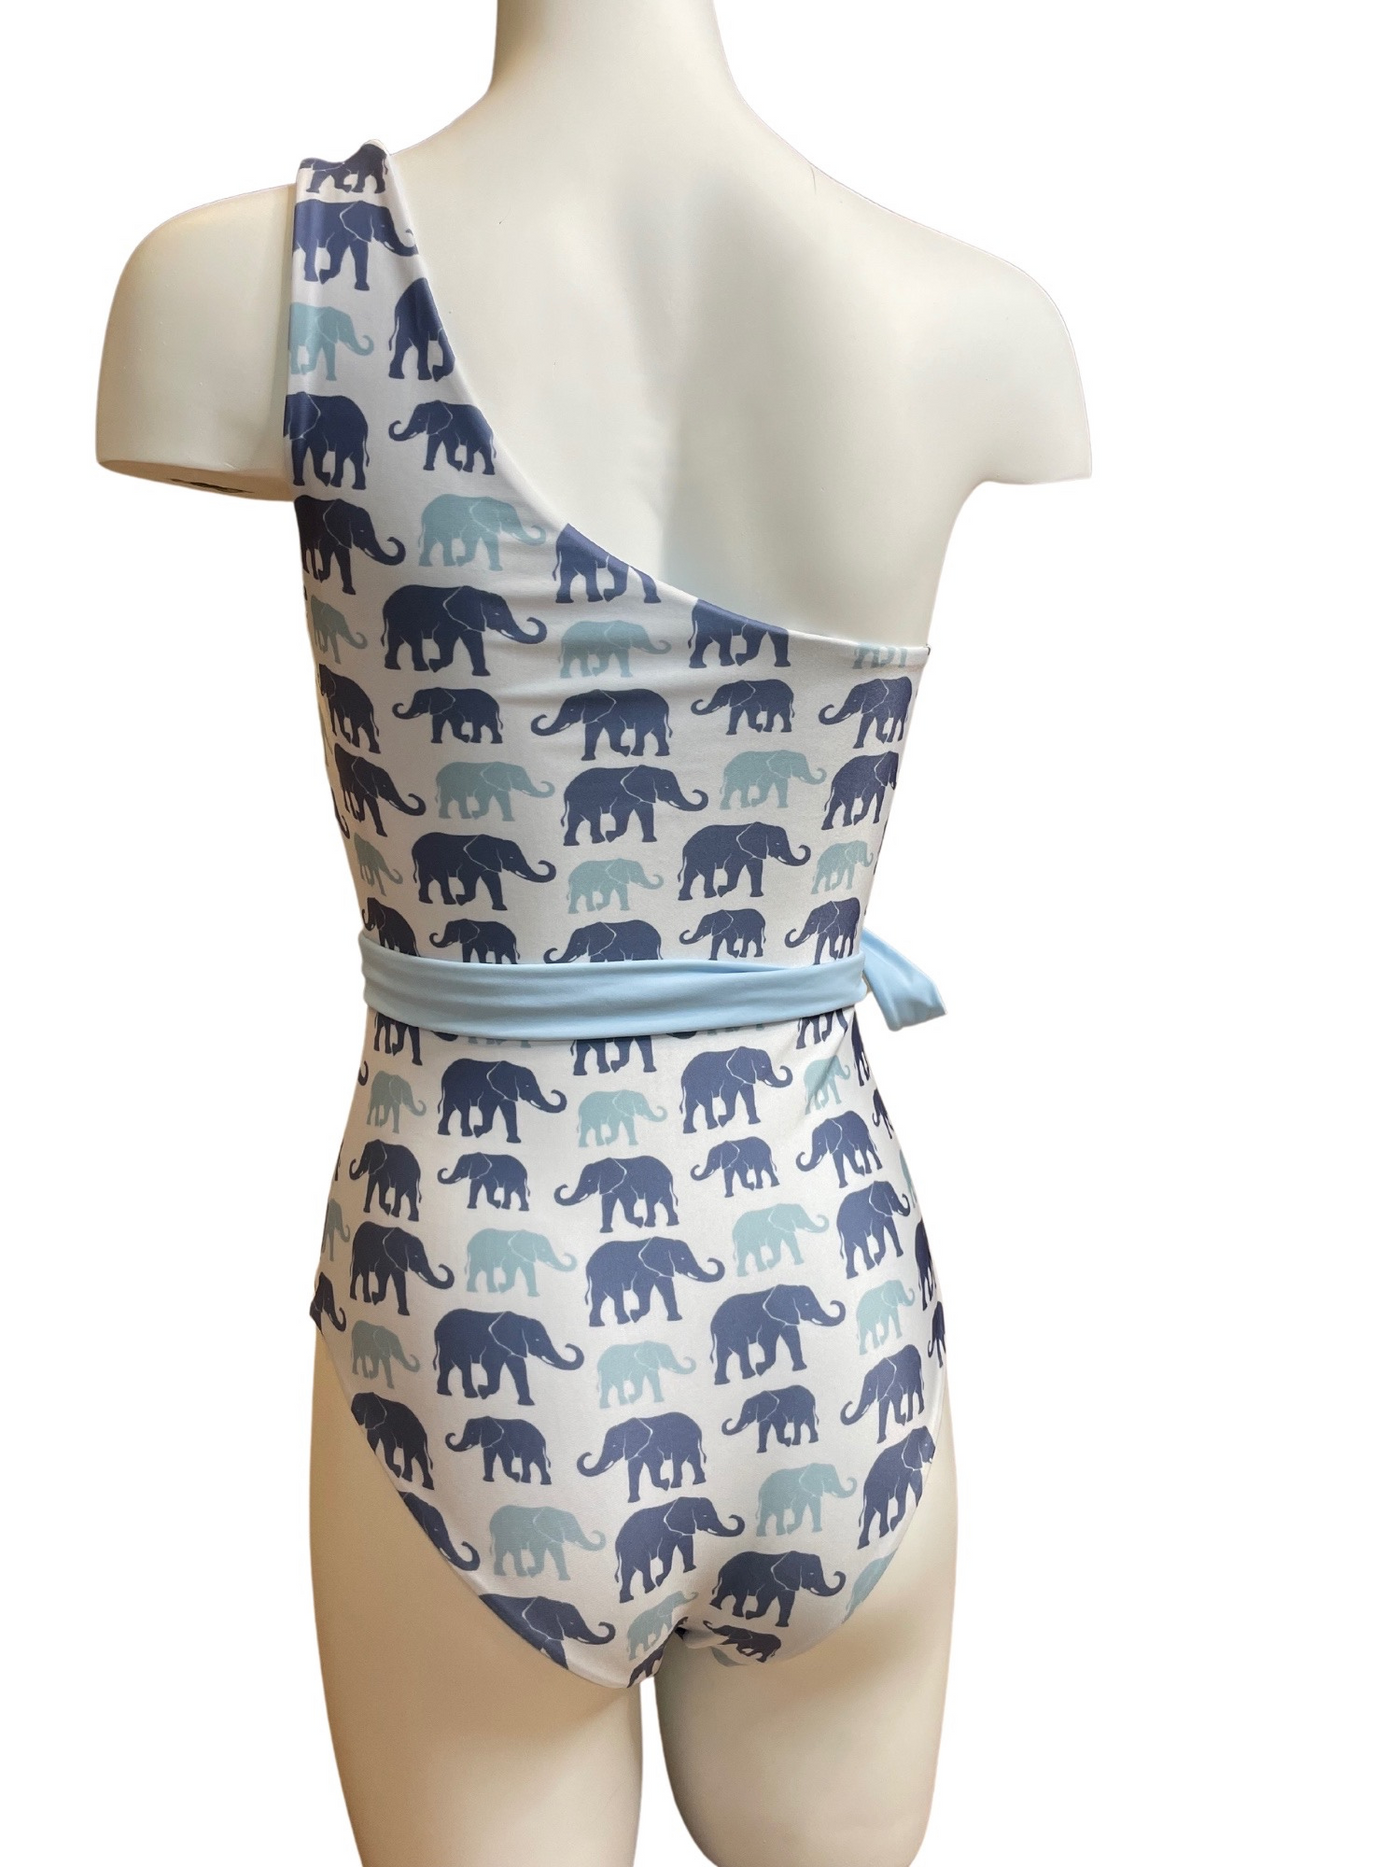 Navalora Matching Swimsuits Women's Elephants on Parade One Shoulder One Piece Swimsuit